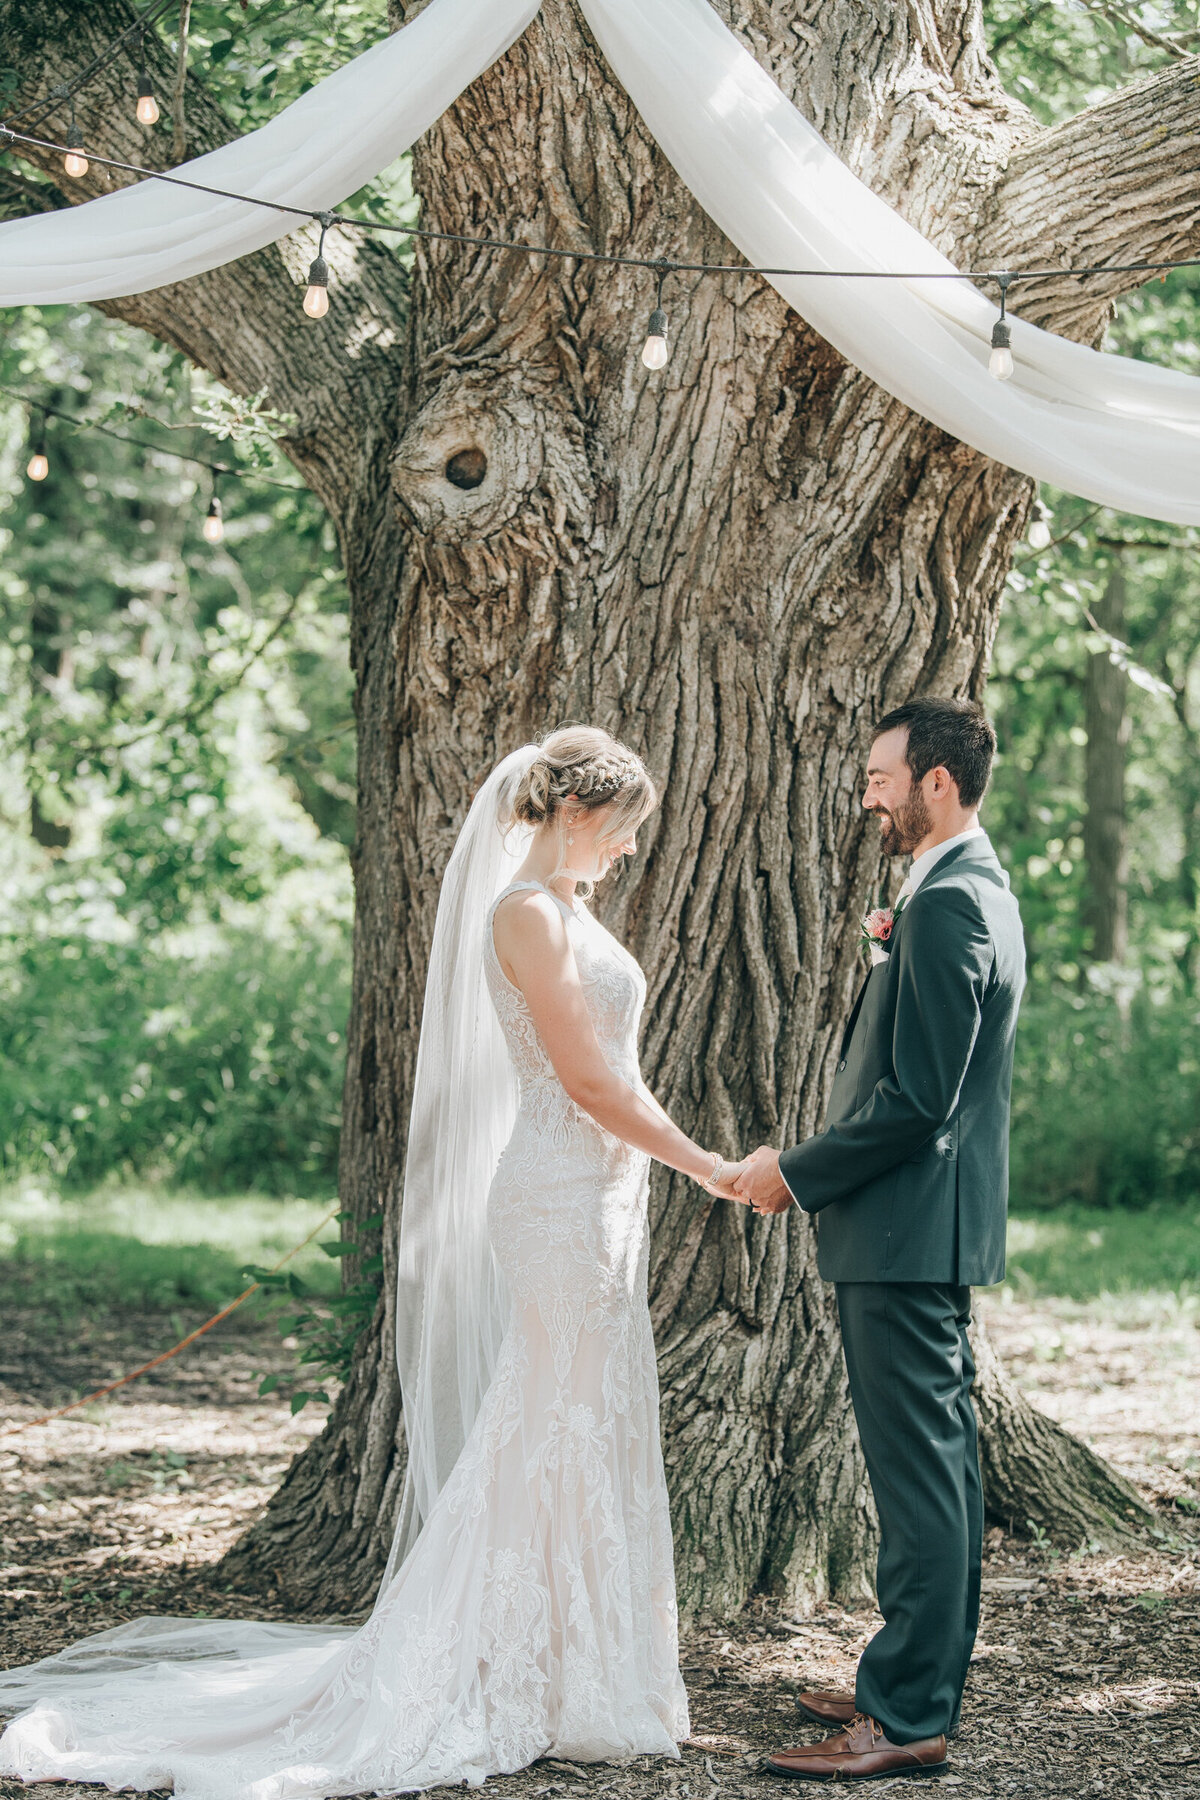 Bride and groom saying their vows under a willow tree during their outdoor Summer wedding ceremony